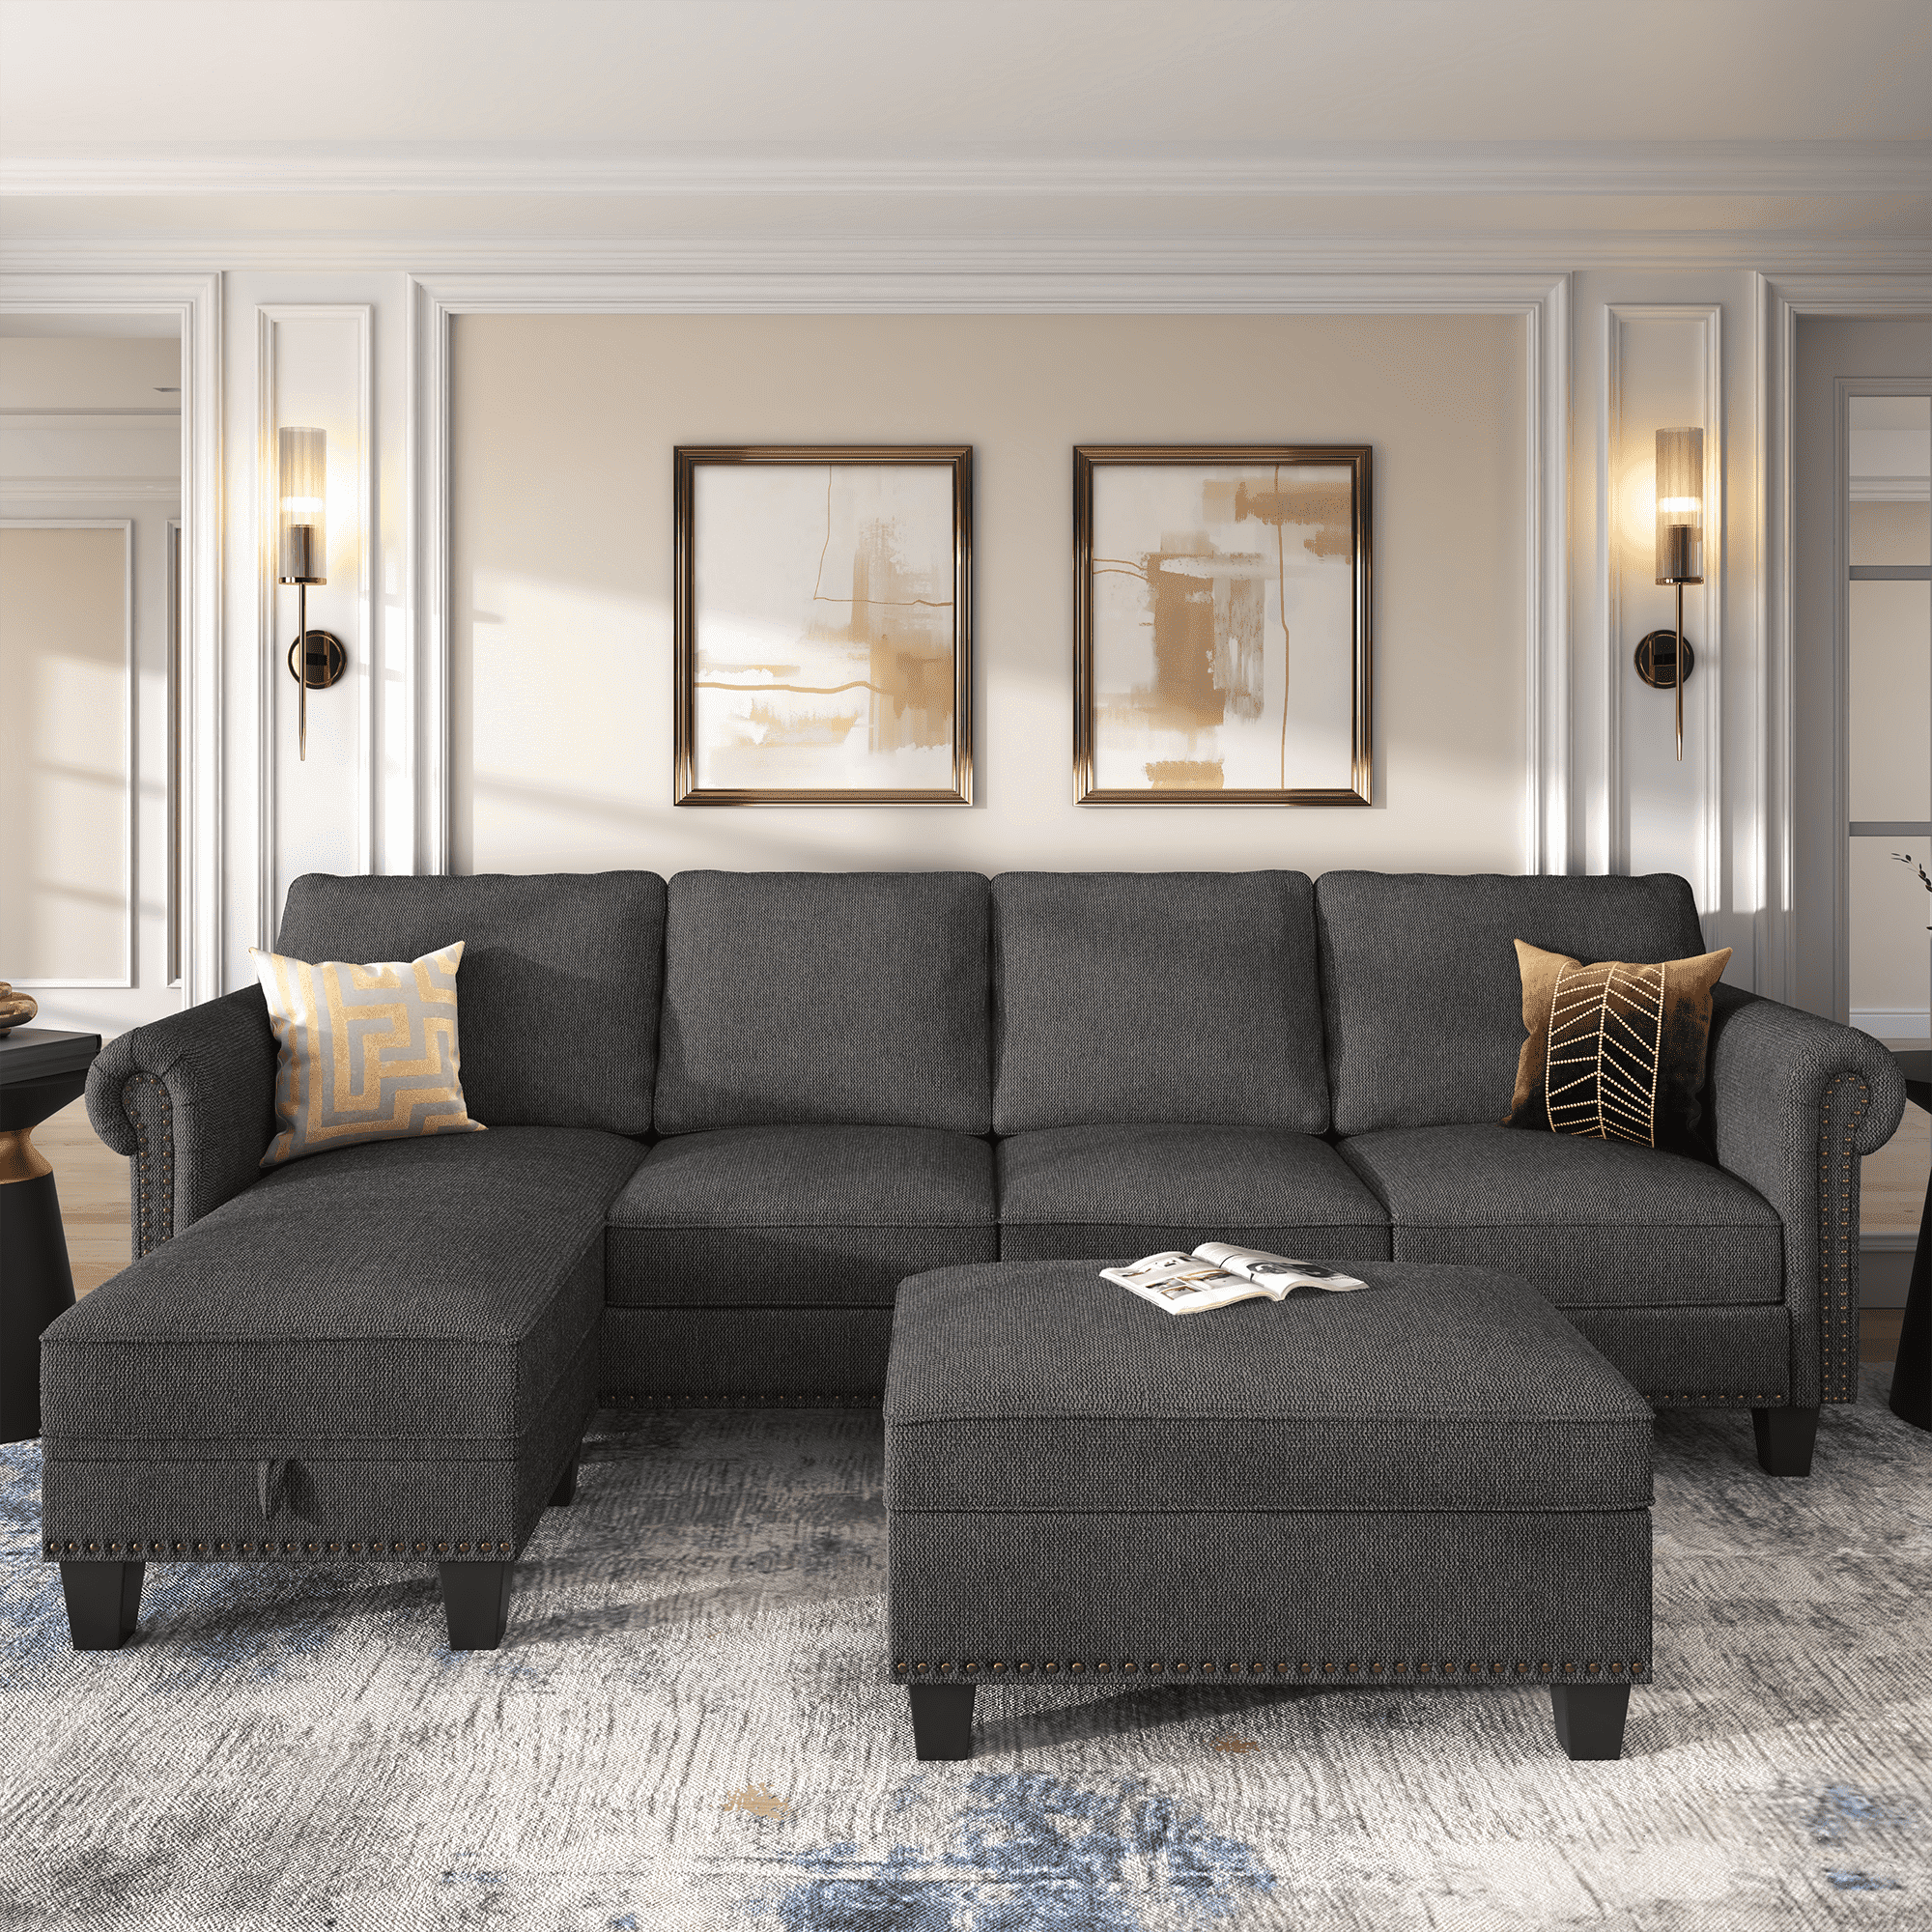 Nolany Sectional Sofa Set With Storage